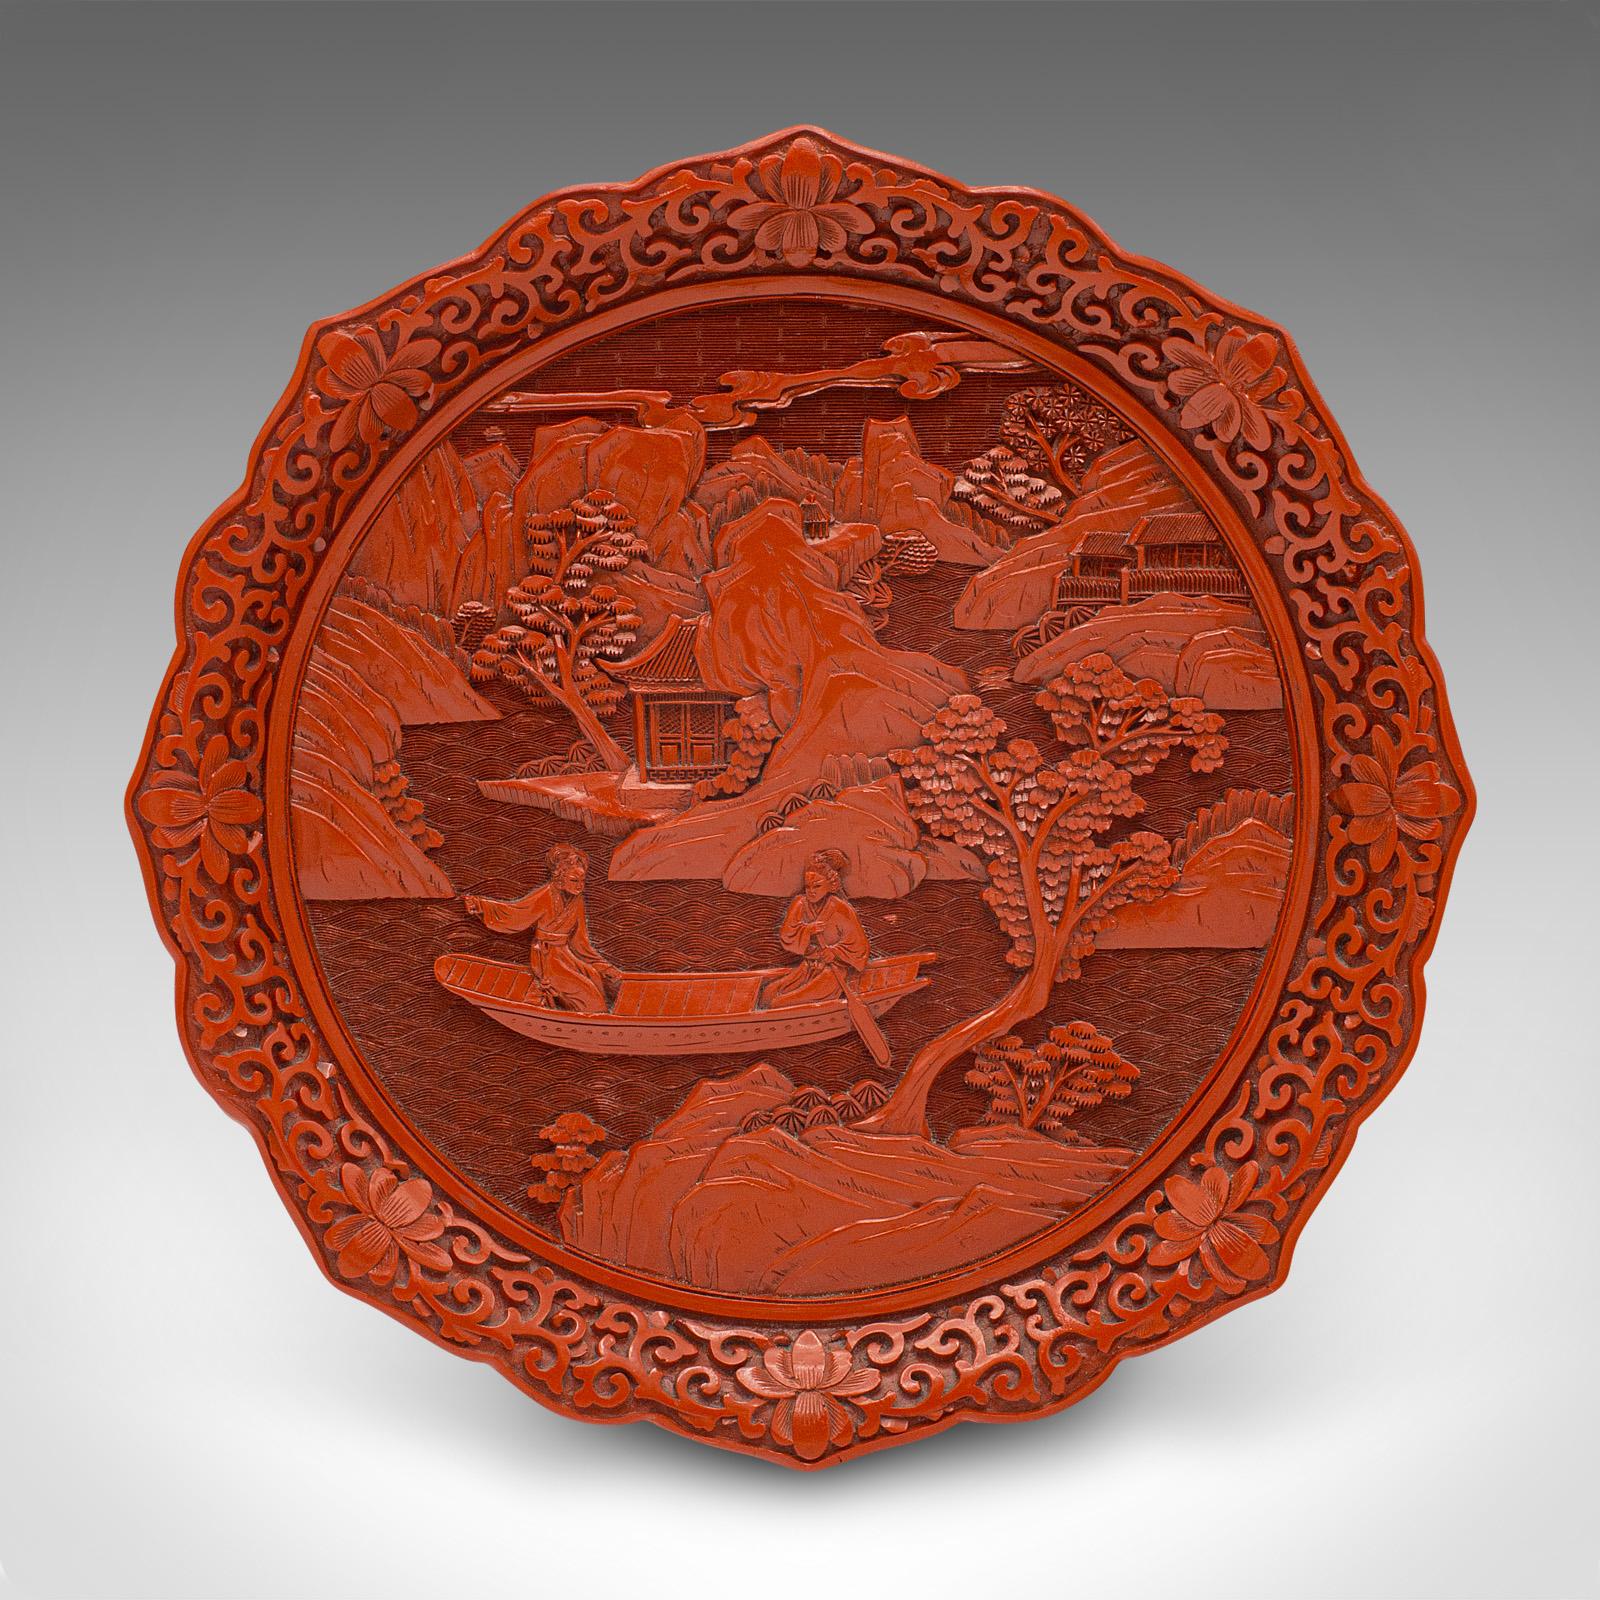 This is a vintage Cinnabar display plate. A Chinese, decorative serving dish, dating to the late 20th century, circa 1980.

Striking carved detail and superb colour
Displays a desirable aged patina and in good order
Rich red hues profusely